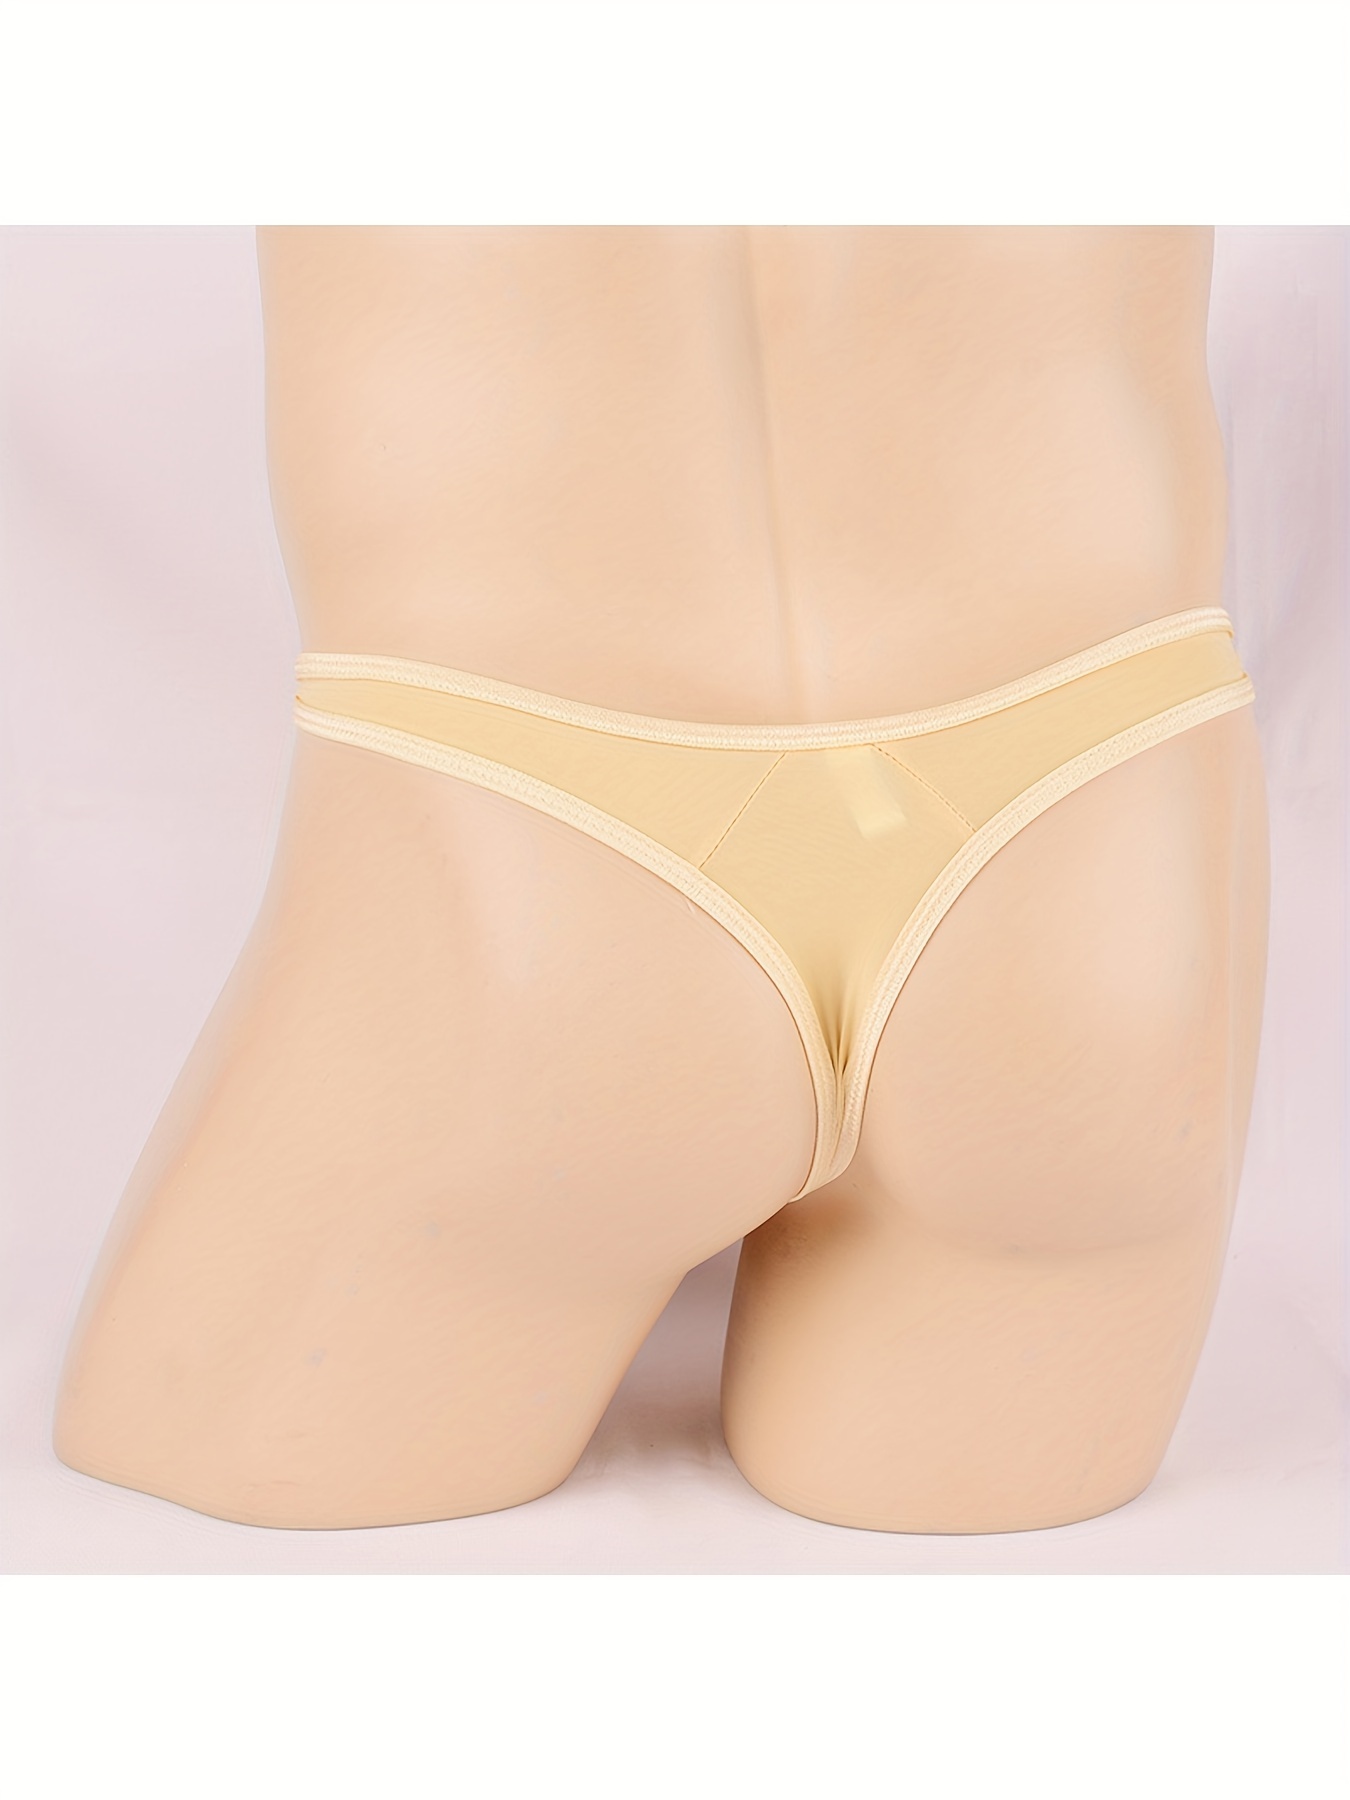 Panties G-string T-back Underwear Briefs Thongs Invisible Thin